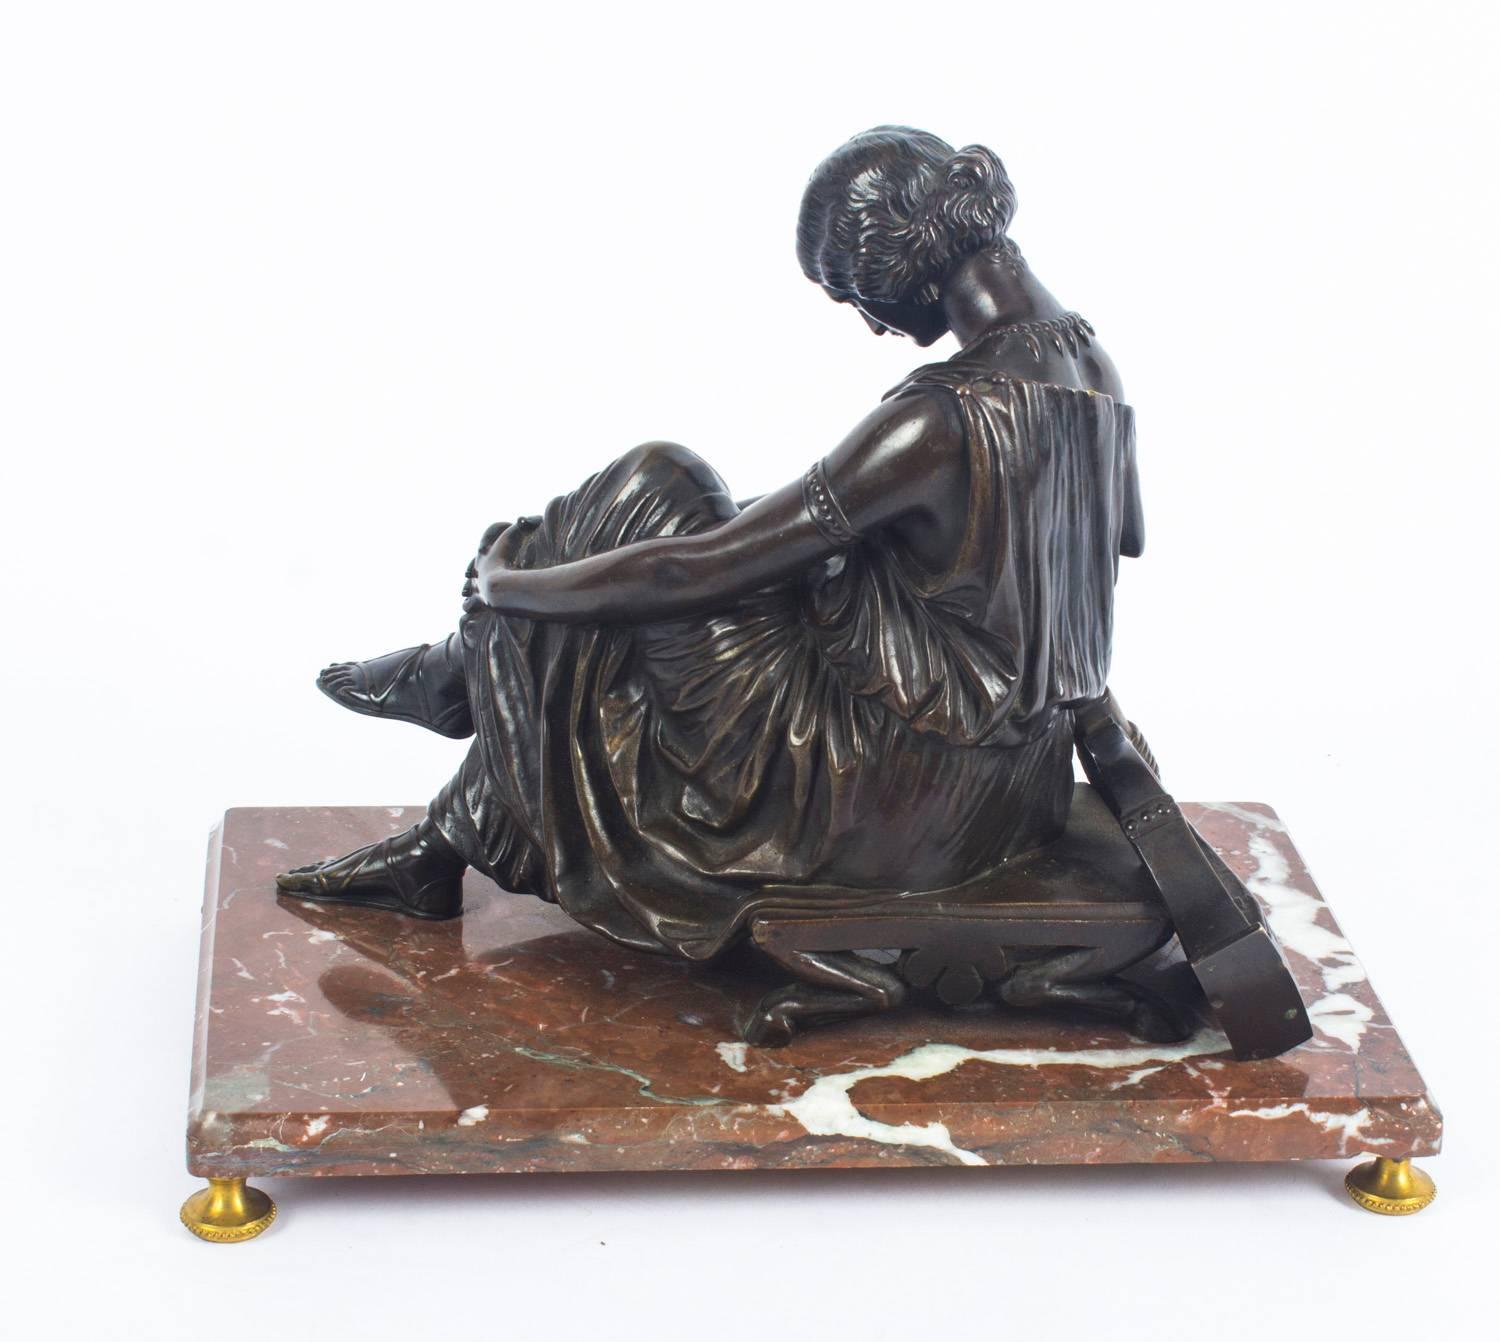 19th Century French Bronze Sculpture of a the Seated Poet Sappho by J. Pradier 1